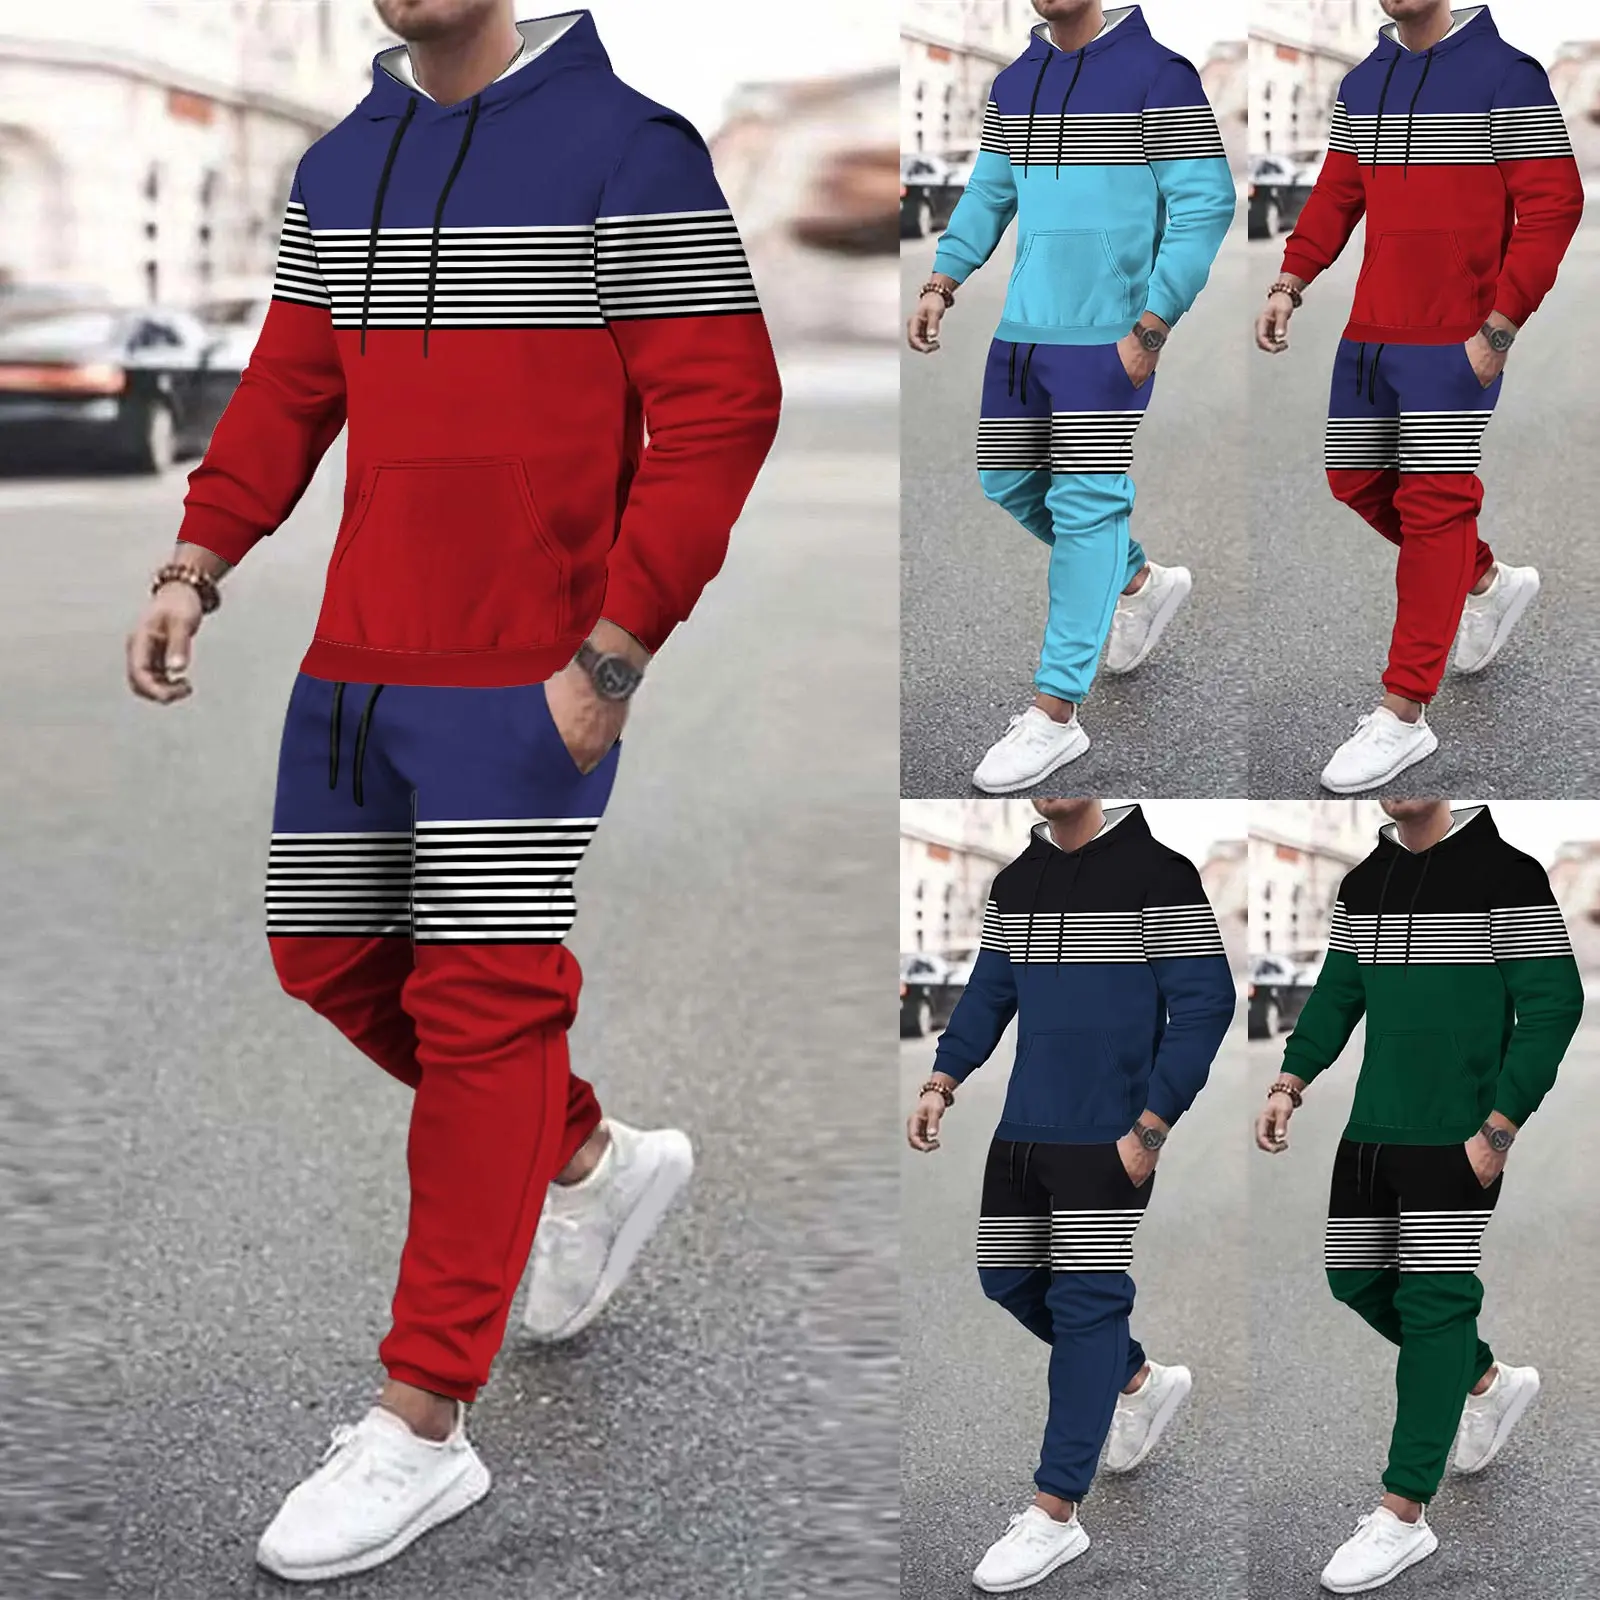 Striped print Hot Sale Mens New Tracksuit Hoodies and Trousers High Quality Male Dialy Casual Sports Jogging Set Autumn Outfits new fashion sports wear for men tops and trousers set casual jogging suit streetwear